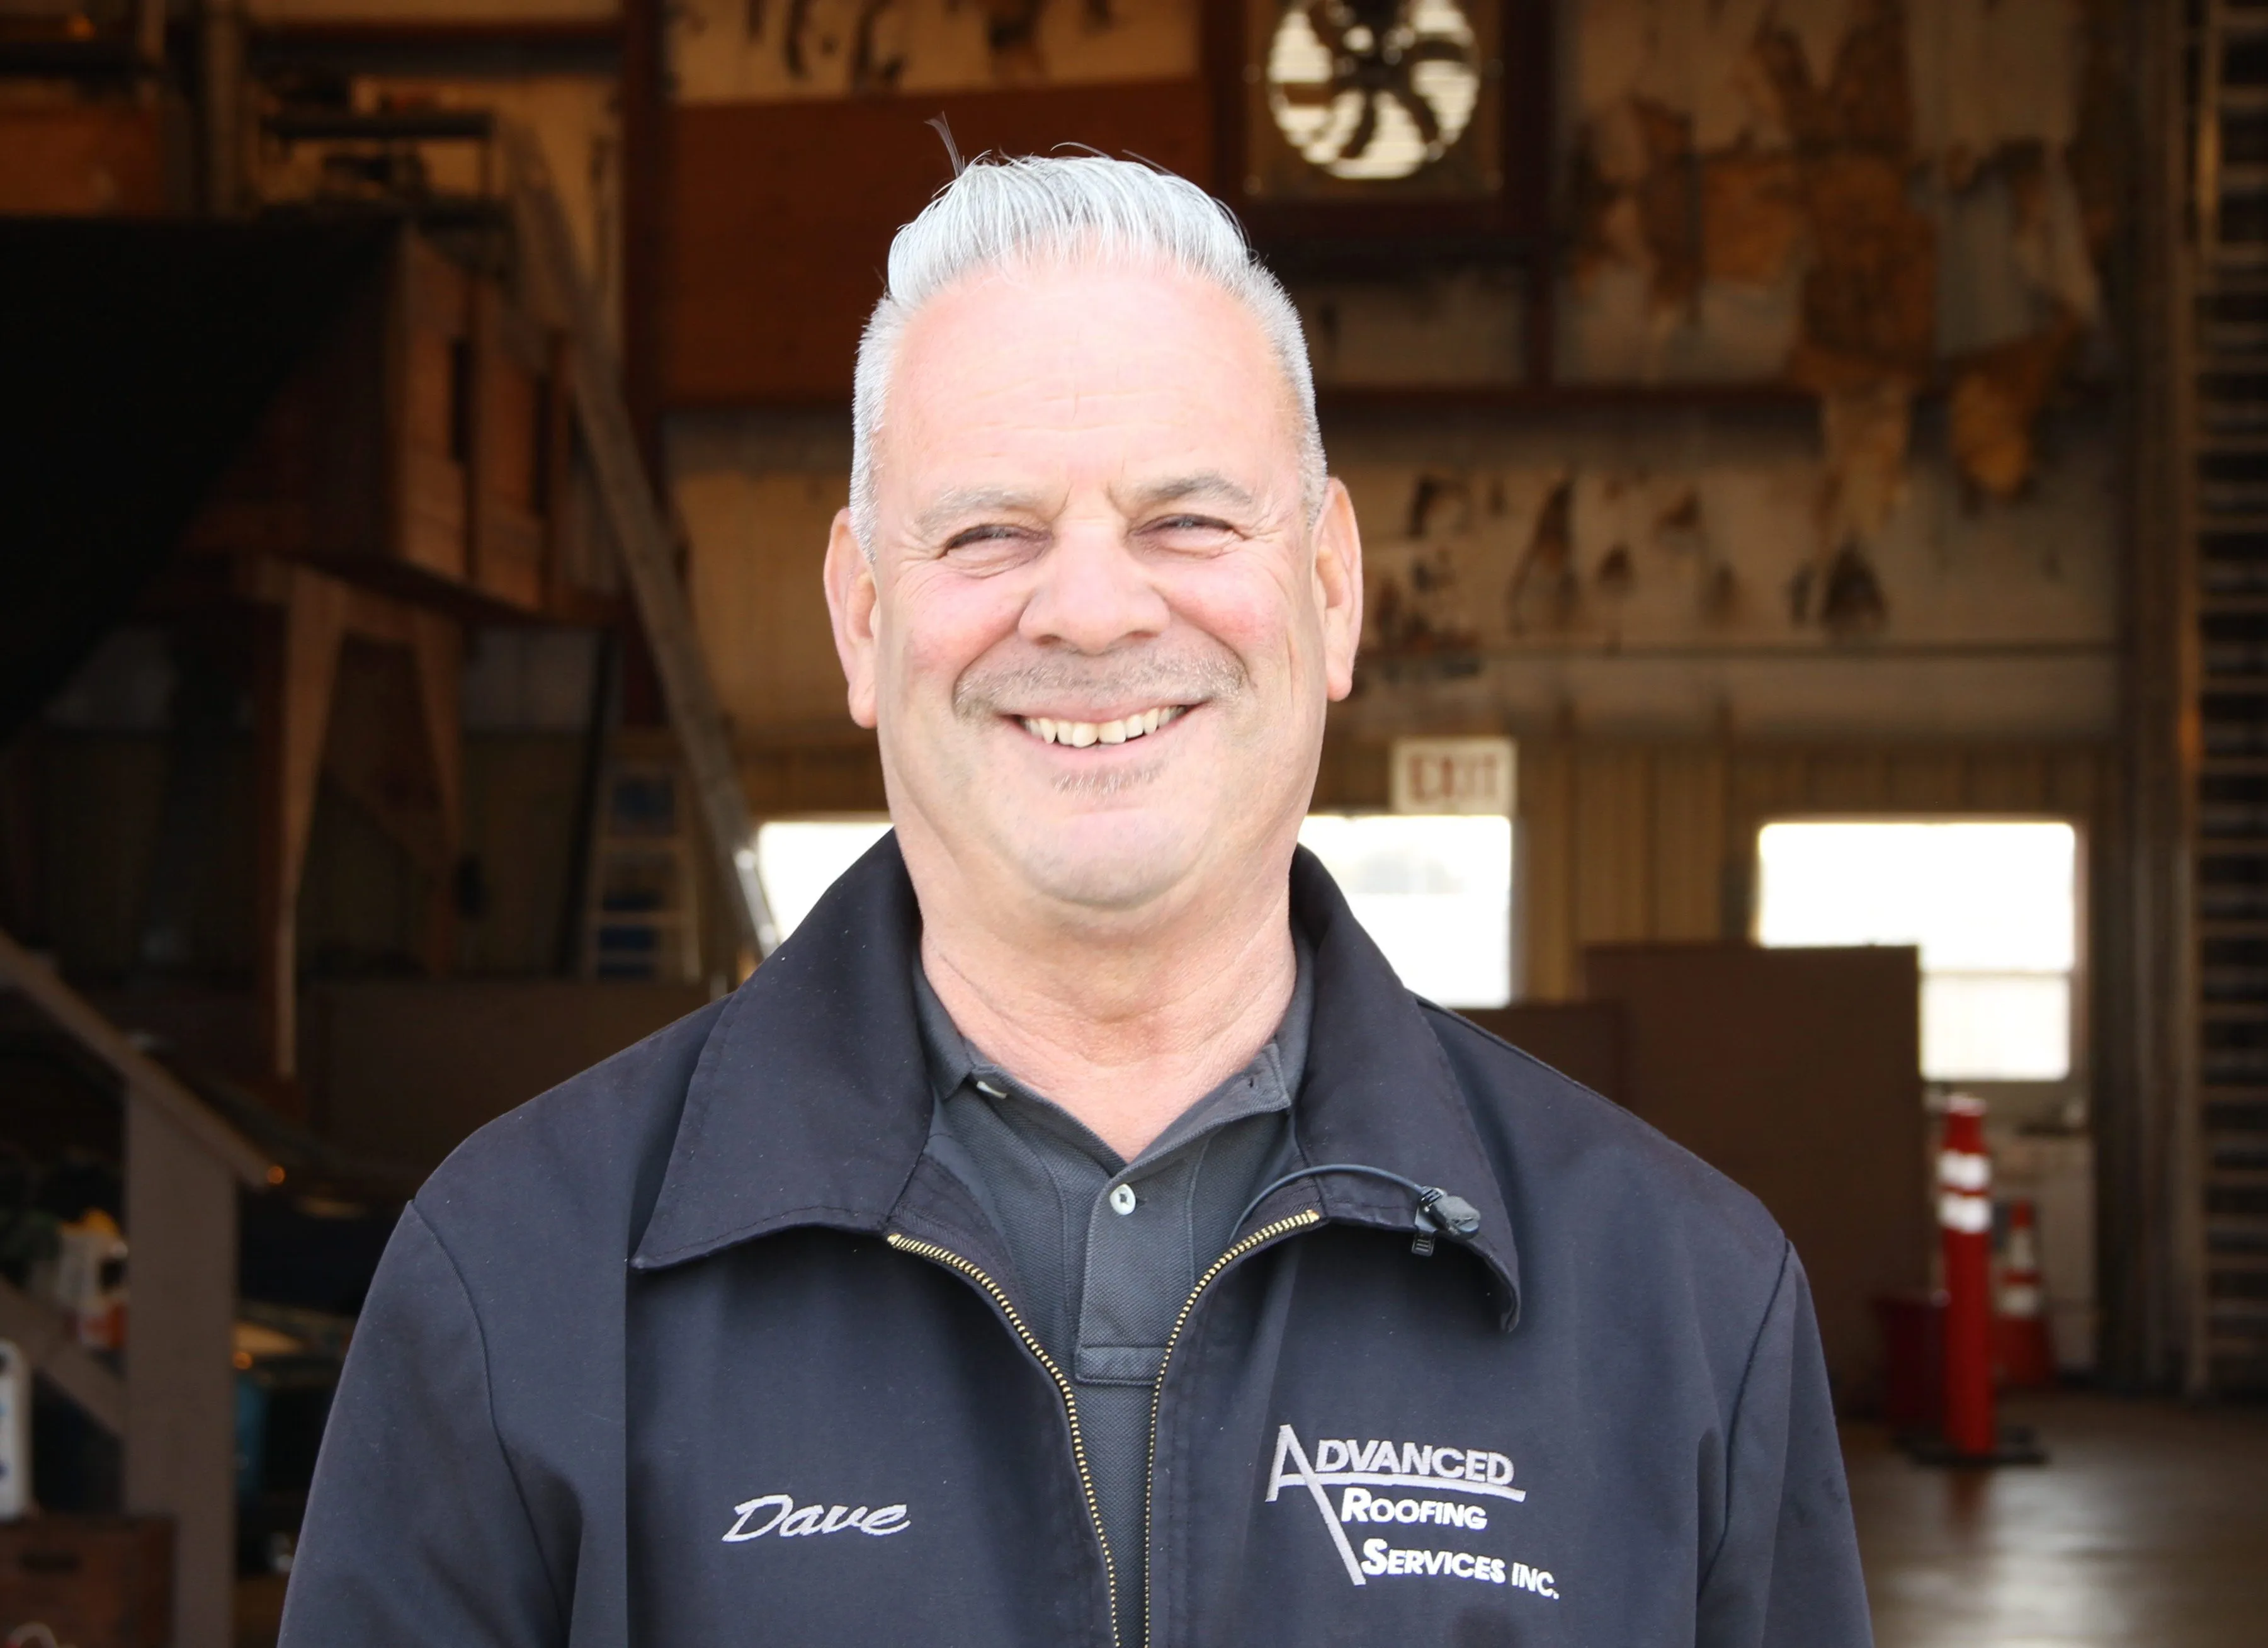 Dave Lopez is owner of Advanced Roofing Services, Inc., a Diamond Certified company since 2003. He can be reached at (510) 592-4978 or by email.